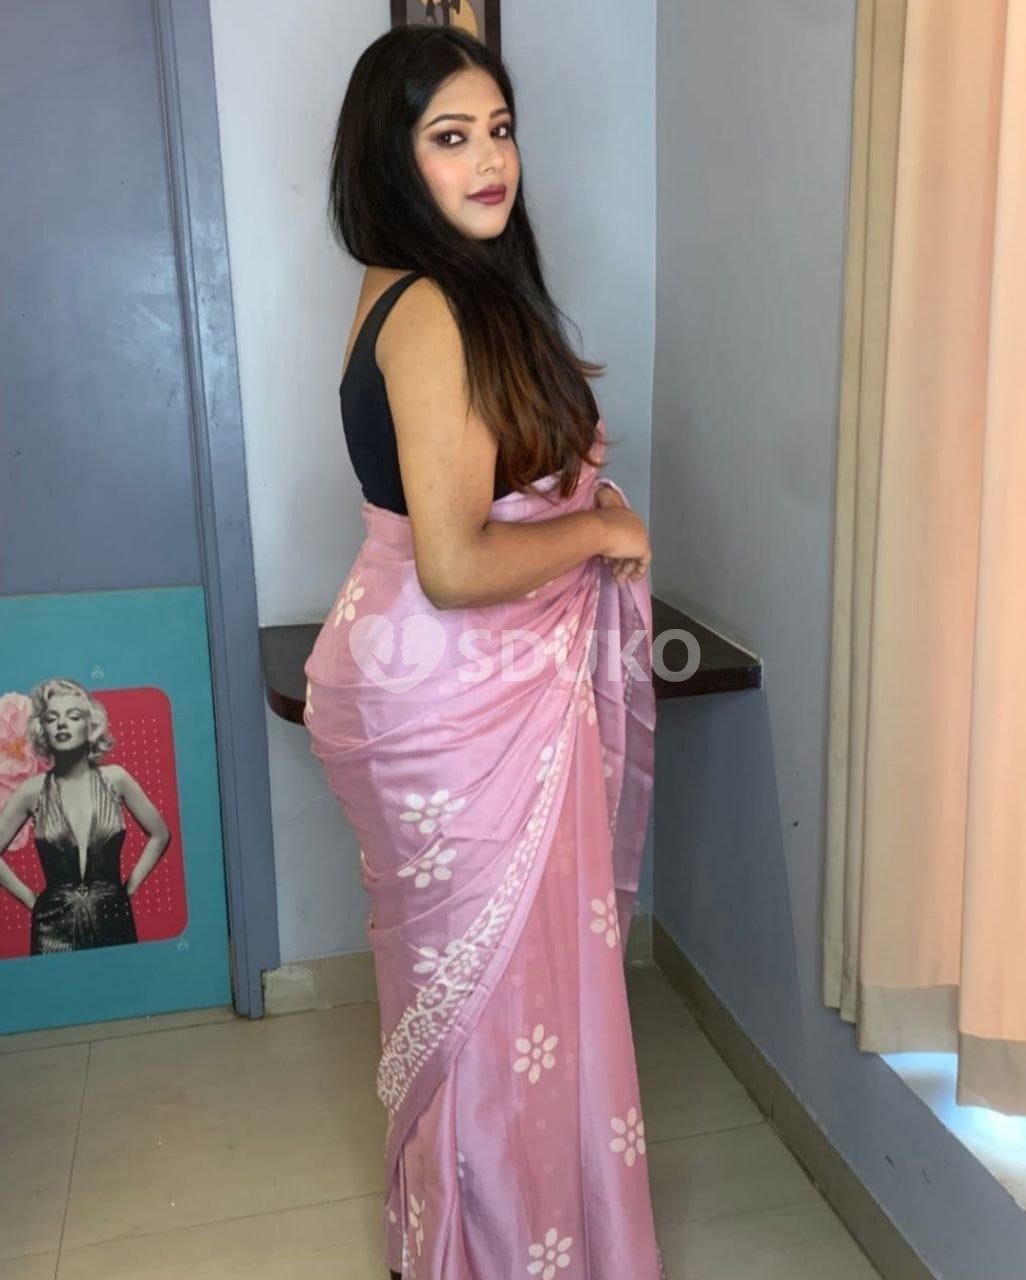 Ujjain CITY 24 X 7///)) HRS AVAILABLE SERVICE 100% SATISFIED AND GENUINE CALL GIRLS SER